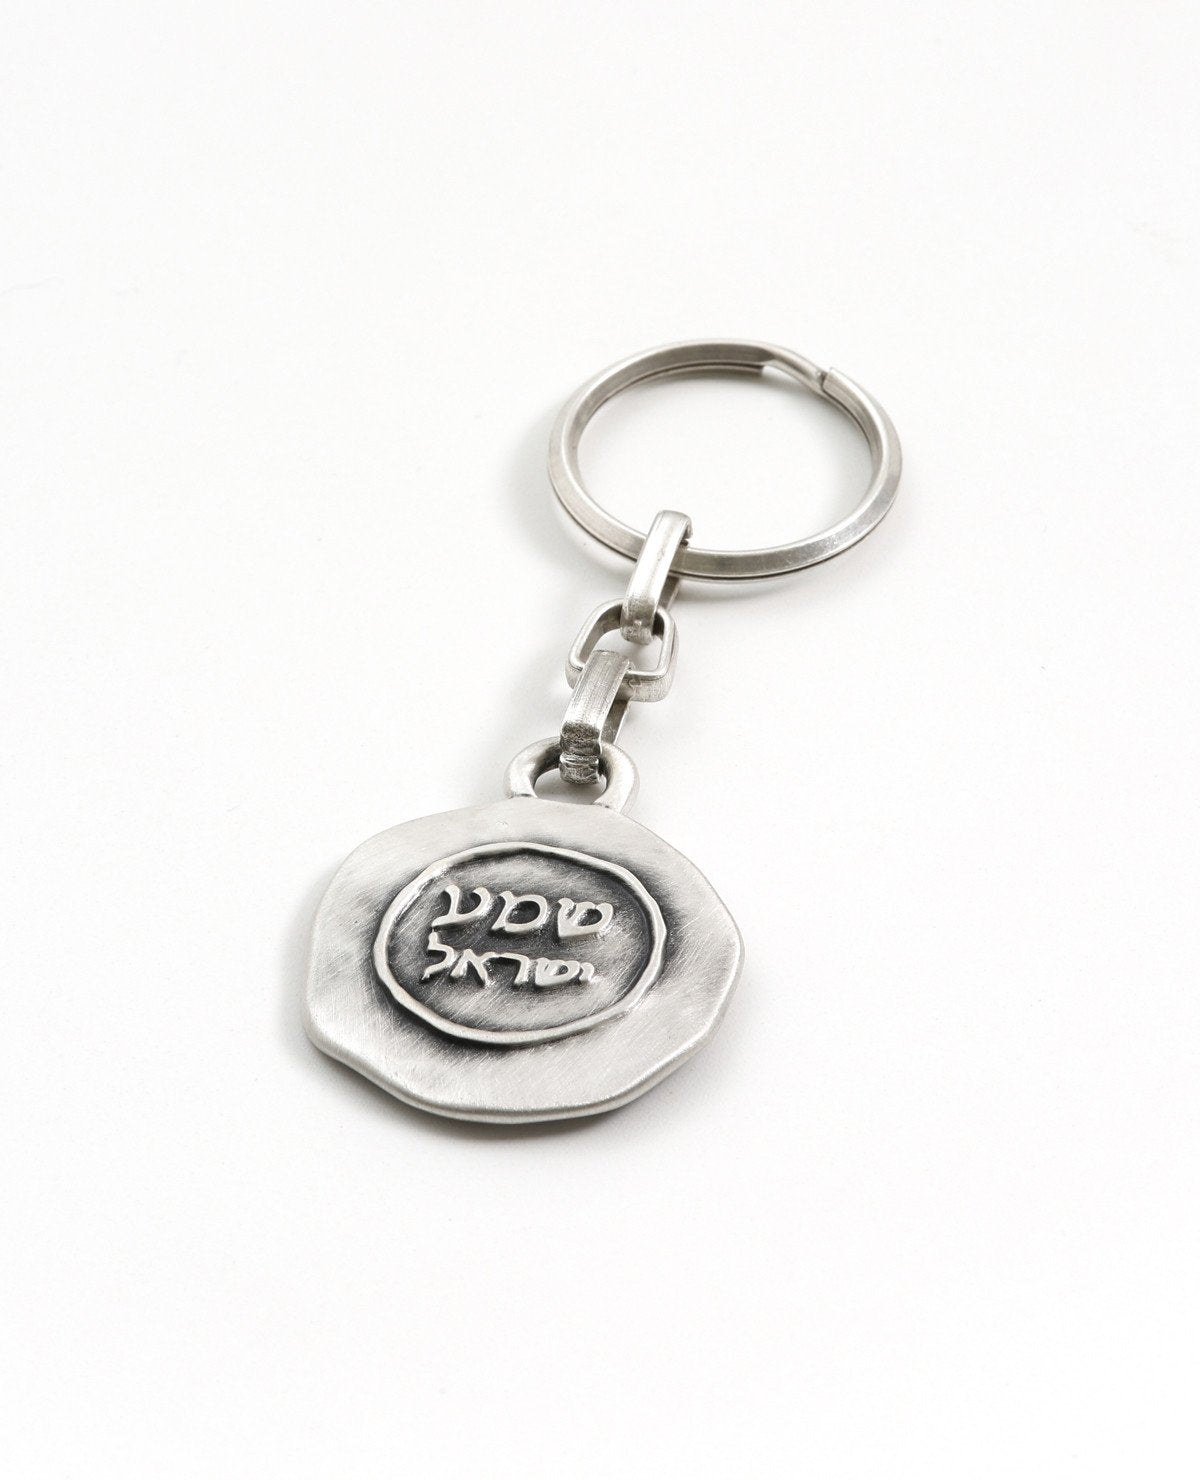 A "Shema Israel" keychain that feels good when in your pocket or bag. The keychain is designed as a circle with the words "Shema Israel" embossed on one side. Embedded on the other side is a blue colored Swarovski crystal with the engraved passage: "I am sending an angel ahead of you to guard you along the way". The keychain is coated in sterling silver and is strong and reliable. Makes a great present for anyone you wish to bless with a safe and successful journey through the deep connection to the words "